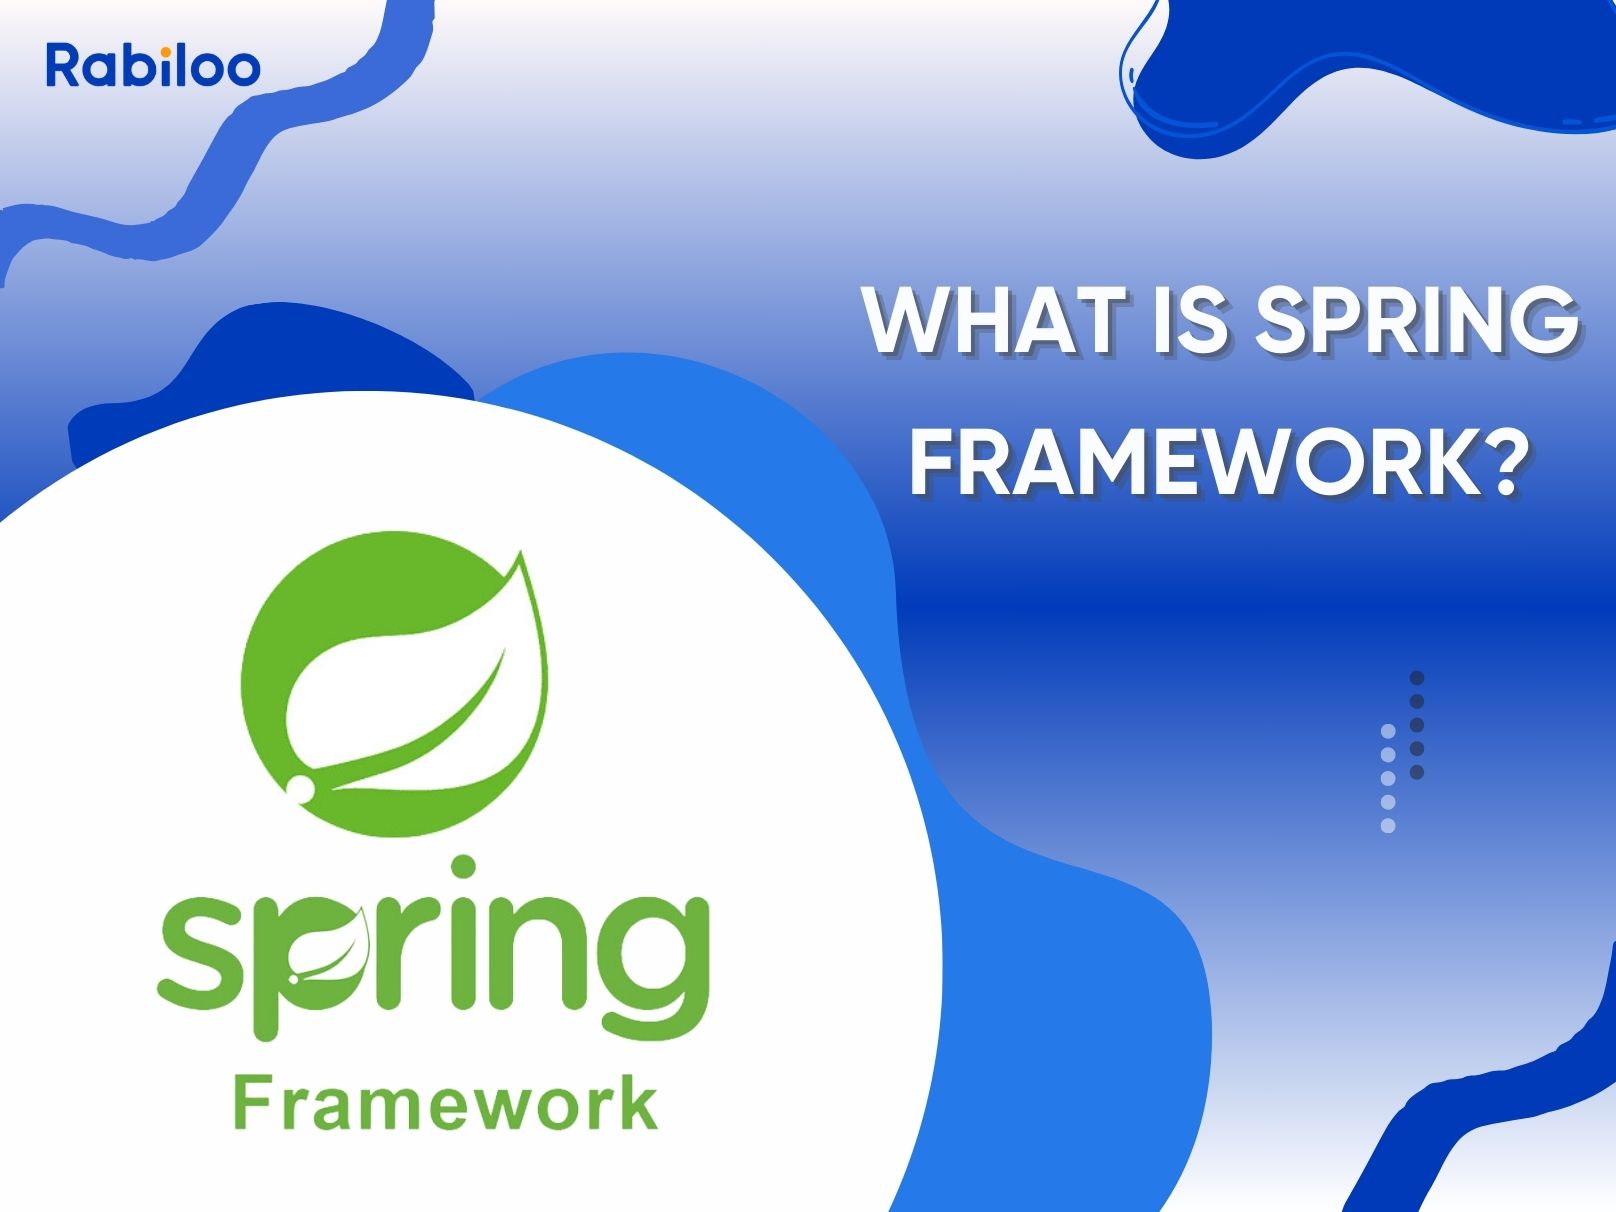 What is Spring Framework, and why should it be used for web application development?